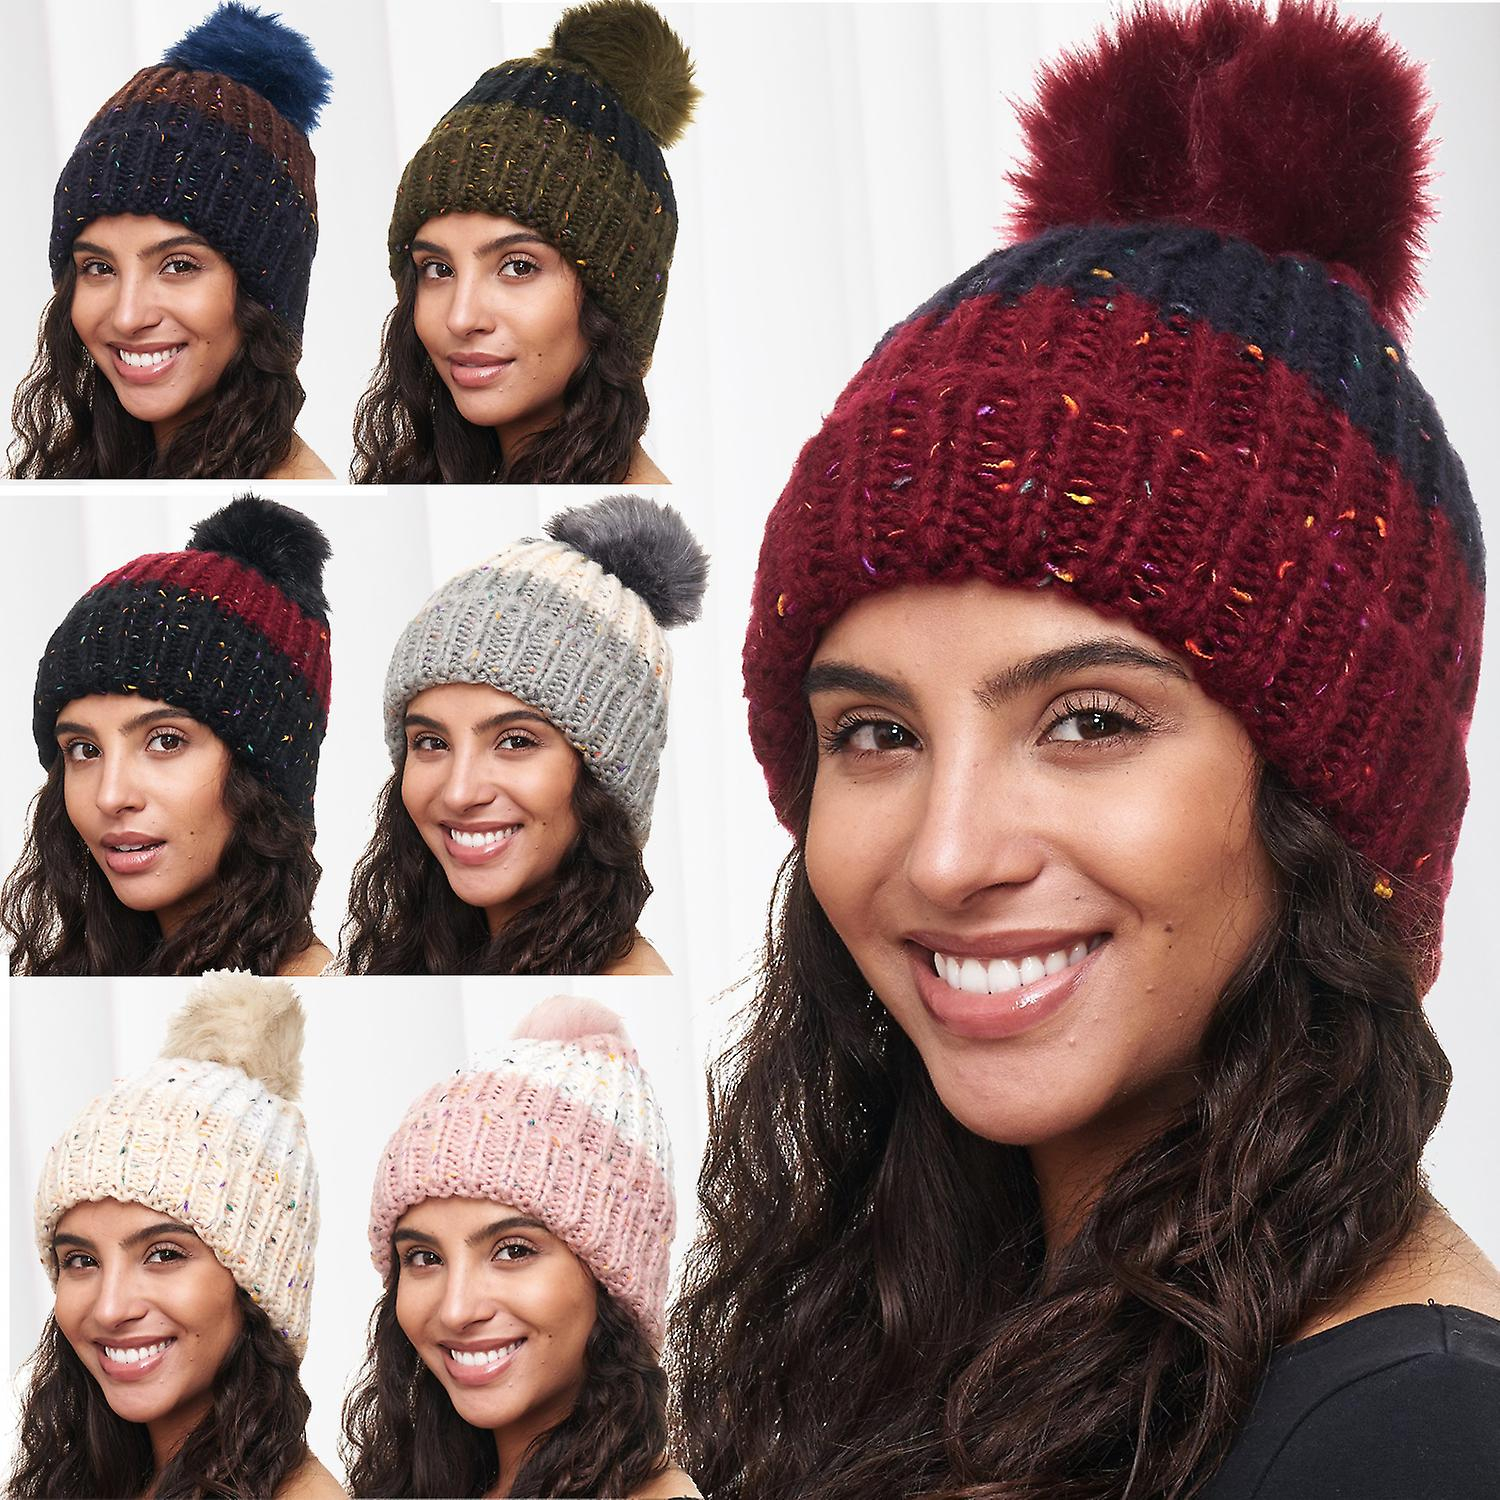 Ladies Knitted Hat Patterns Ladies Hat Colorful Meliert Beanie Bommel Cap Knitted Hat Pattern Rainbow